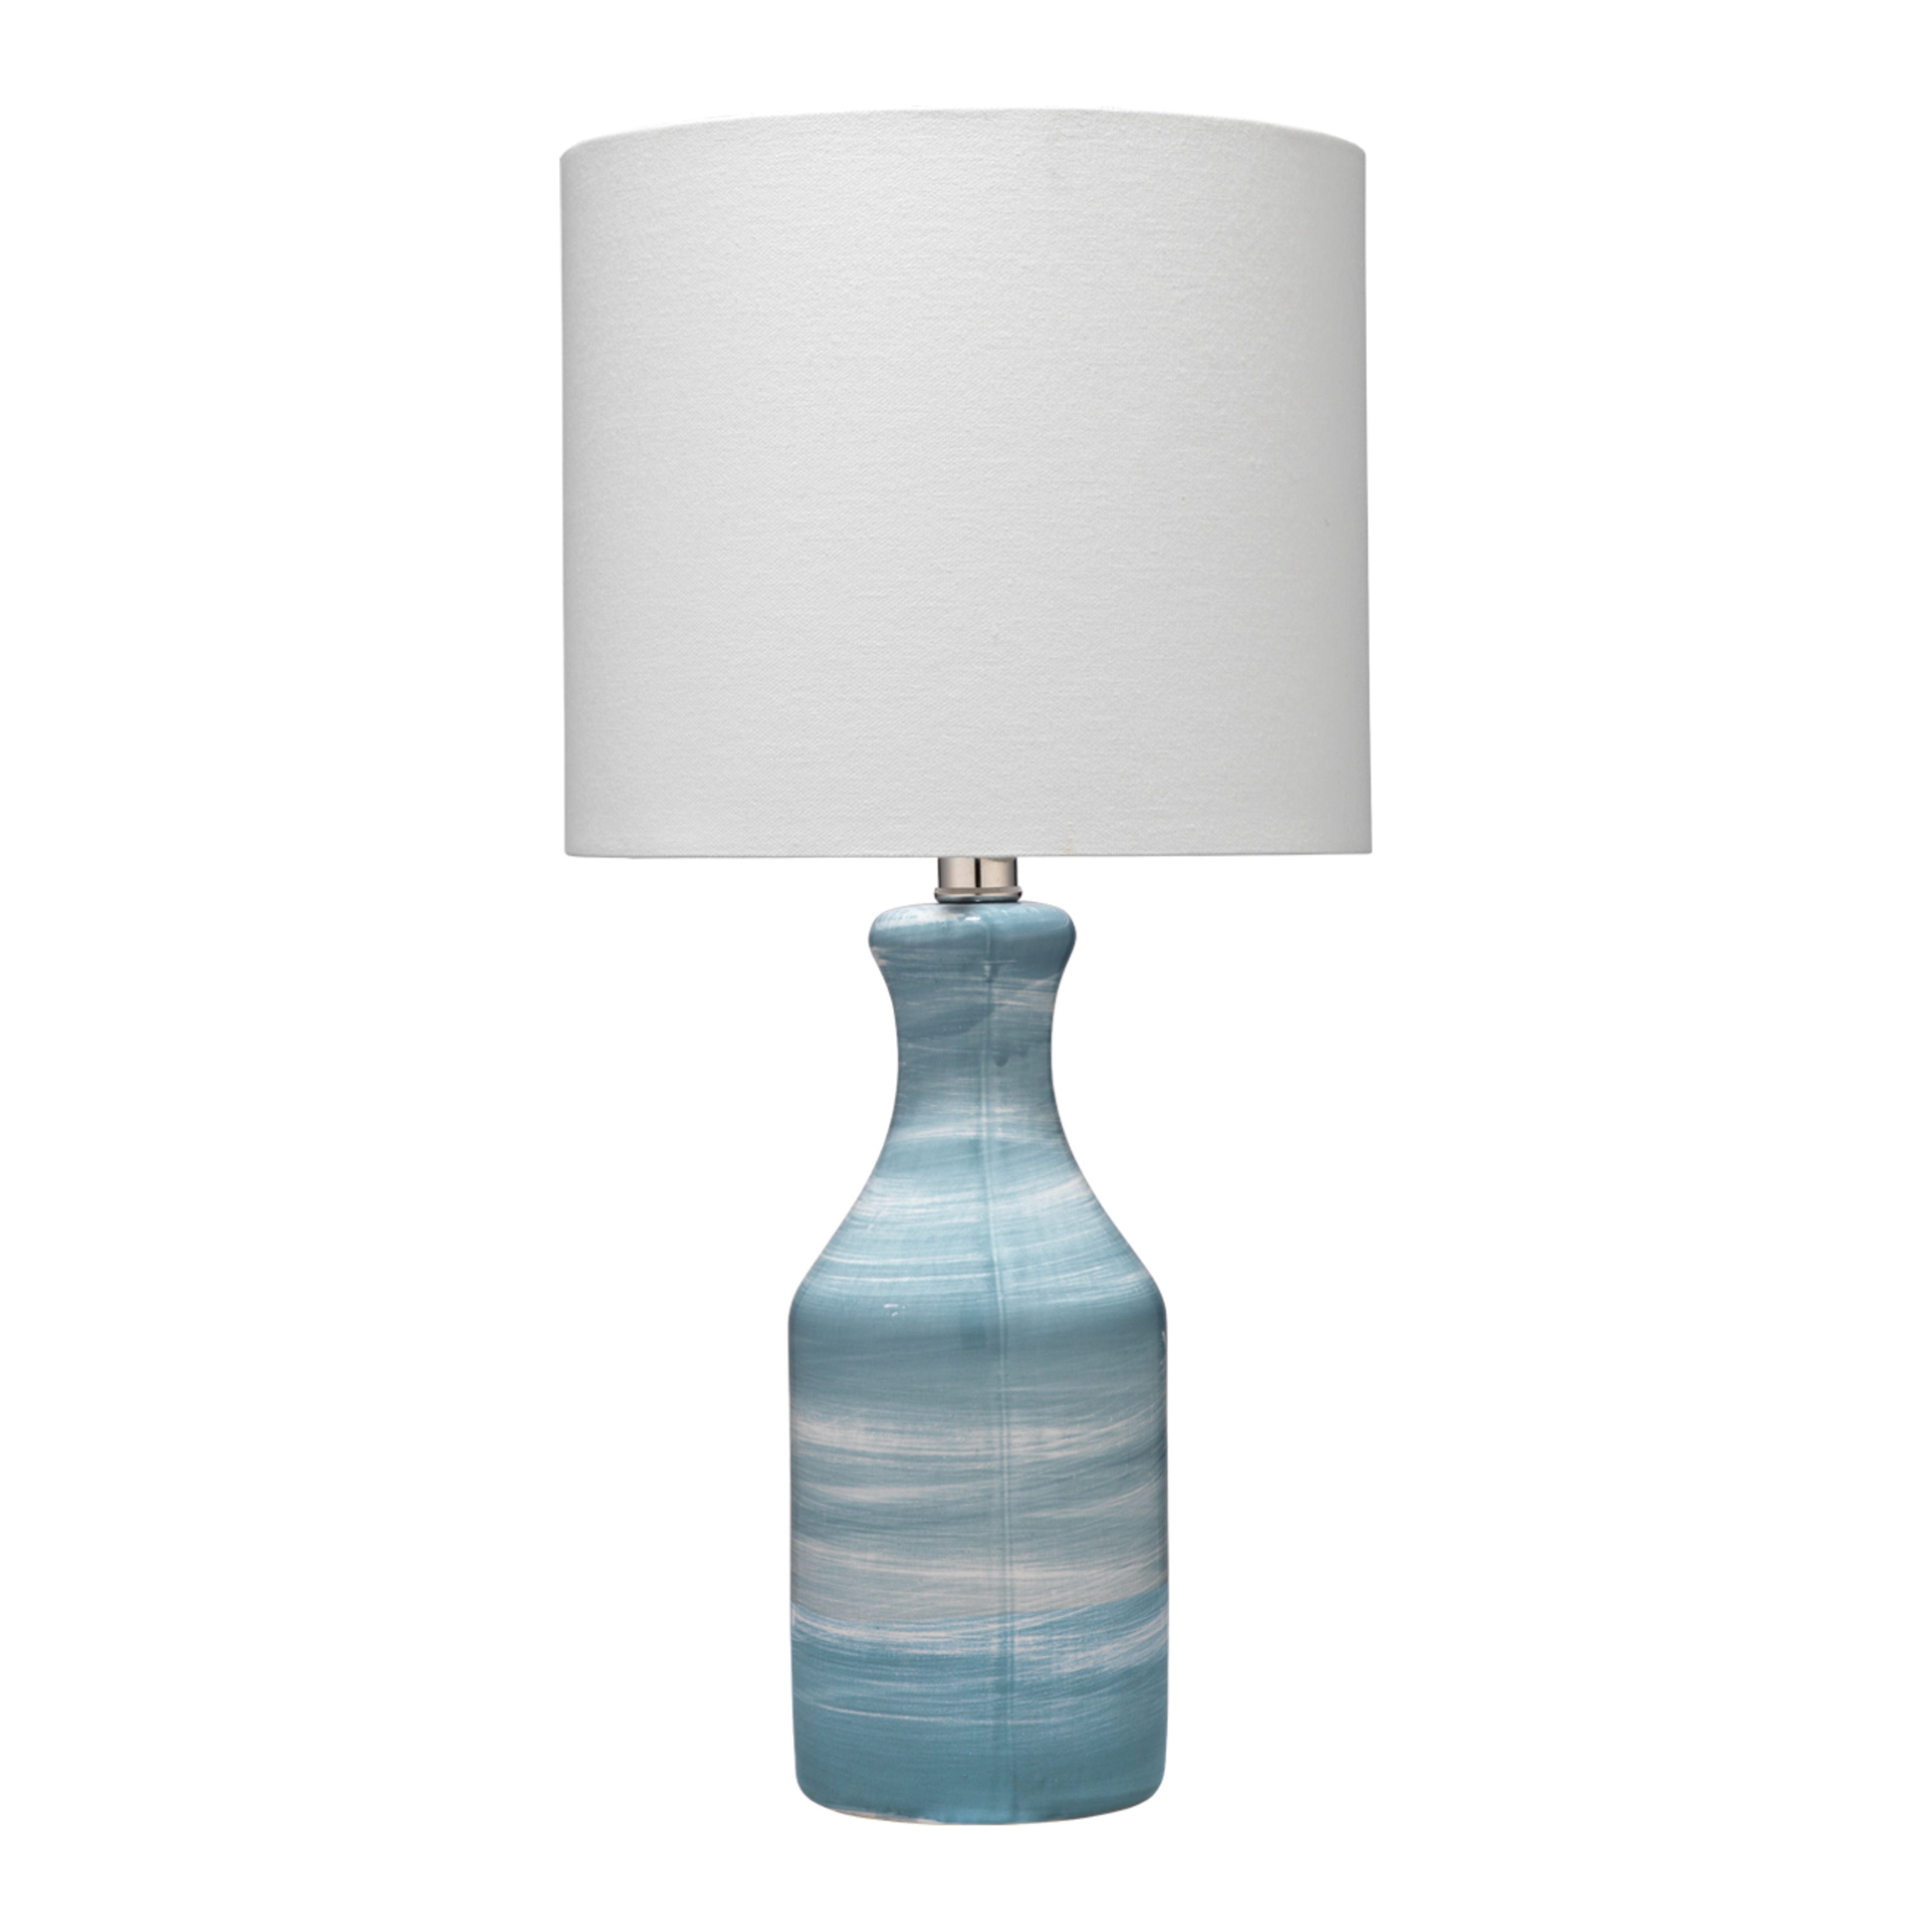 Jamie Young Company - BL716-TL3BL - Bungalow Table Lamp
UNO Socket - Bungalow - Blue